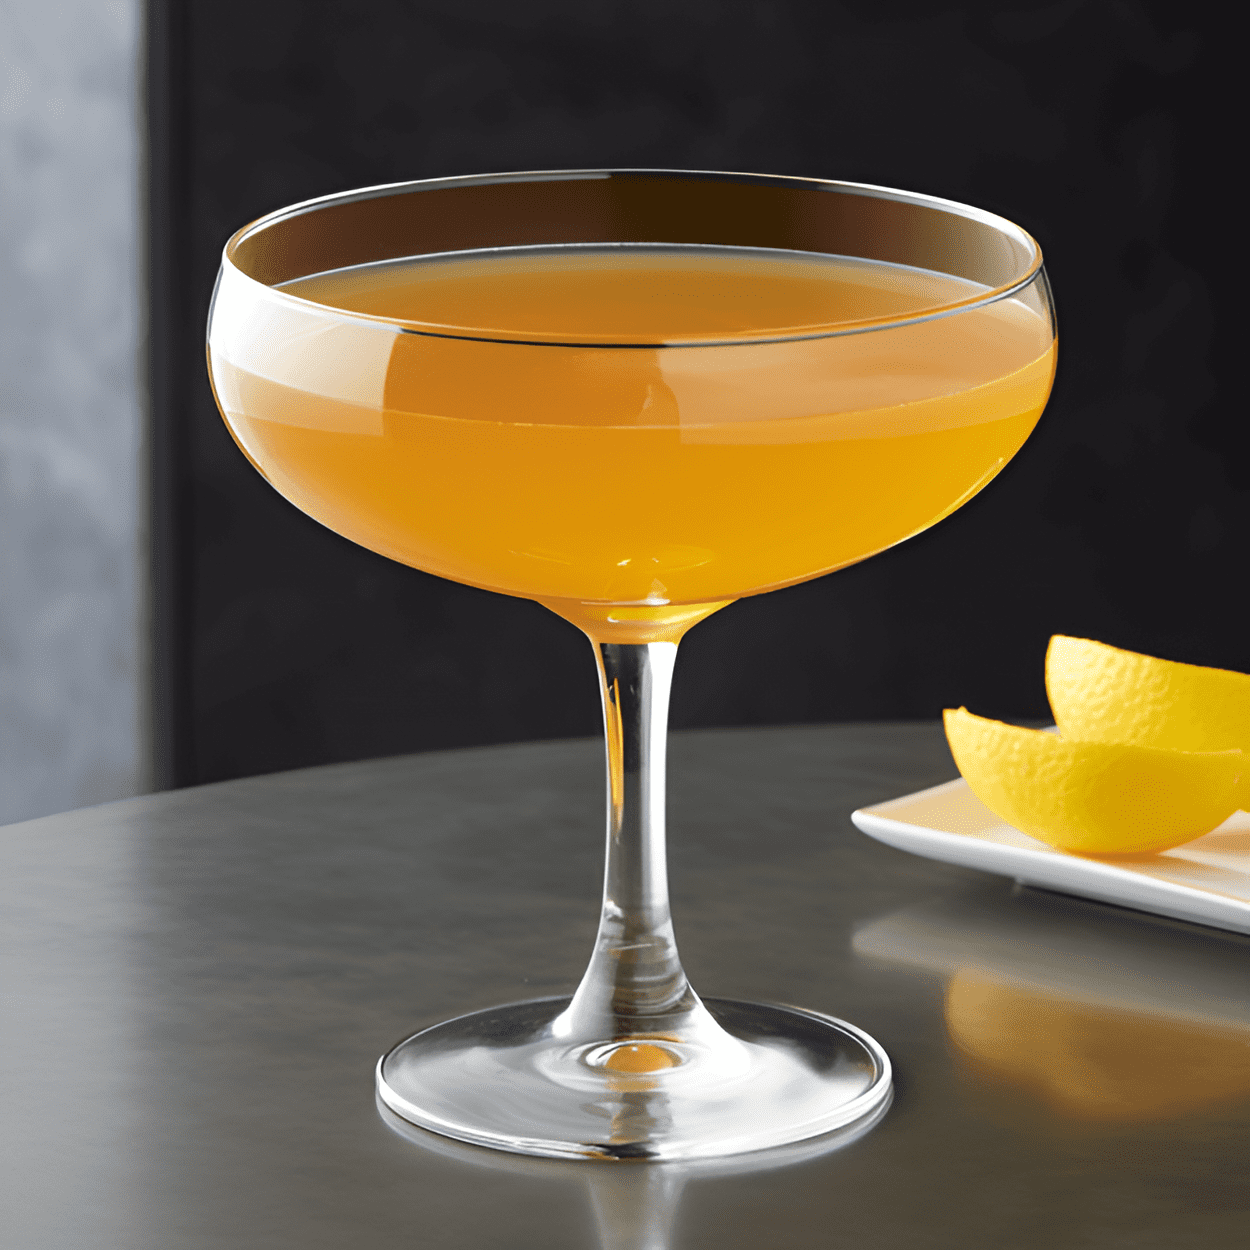 Statesman Cocktail Recipe - The Statesman is a harmonious blend of sweet, sour, and strong. The bourbon provides a robust, smoky flavor, while the apricot brandy adds a sweet fruitiness. The lemon juice cuts through the sweetness, adding a refreshing sour note.